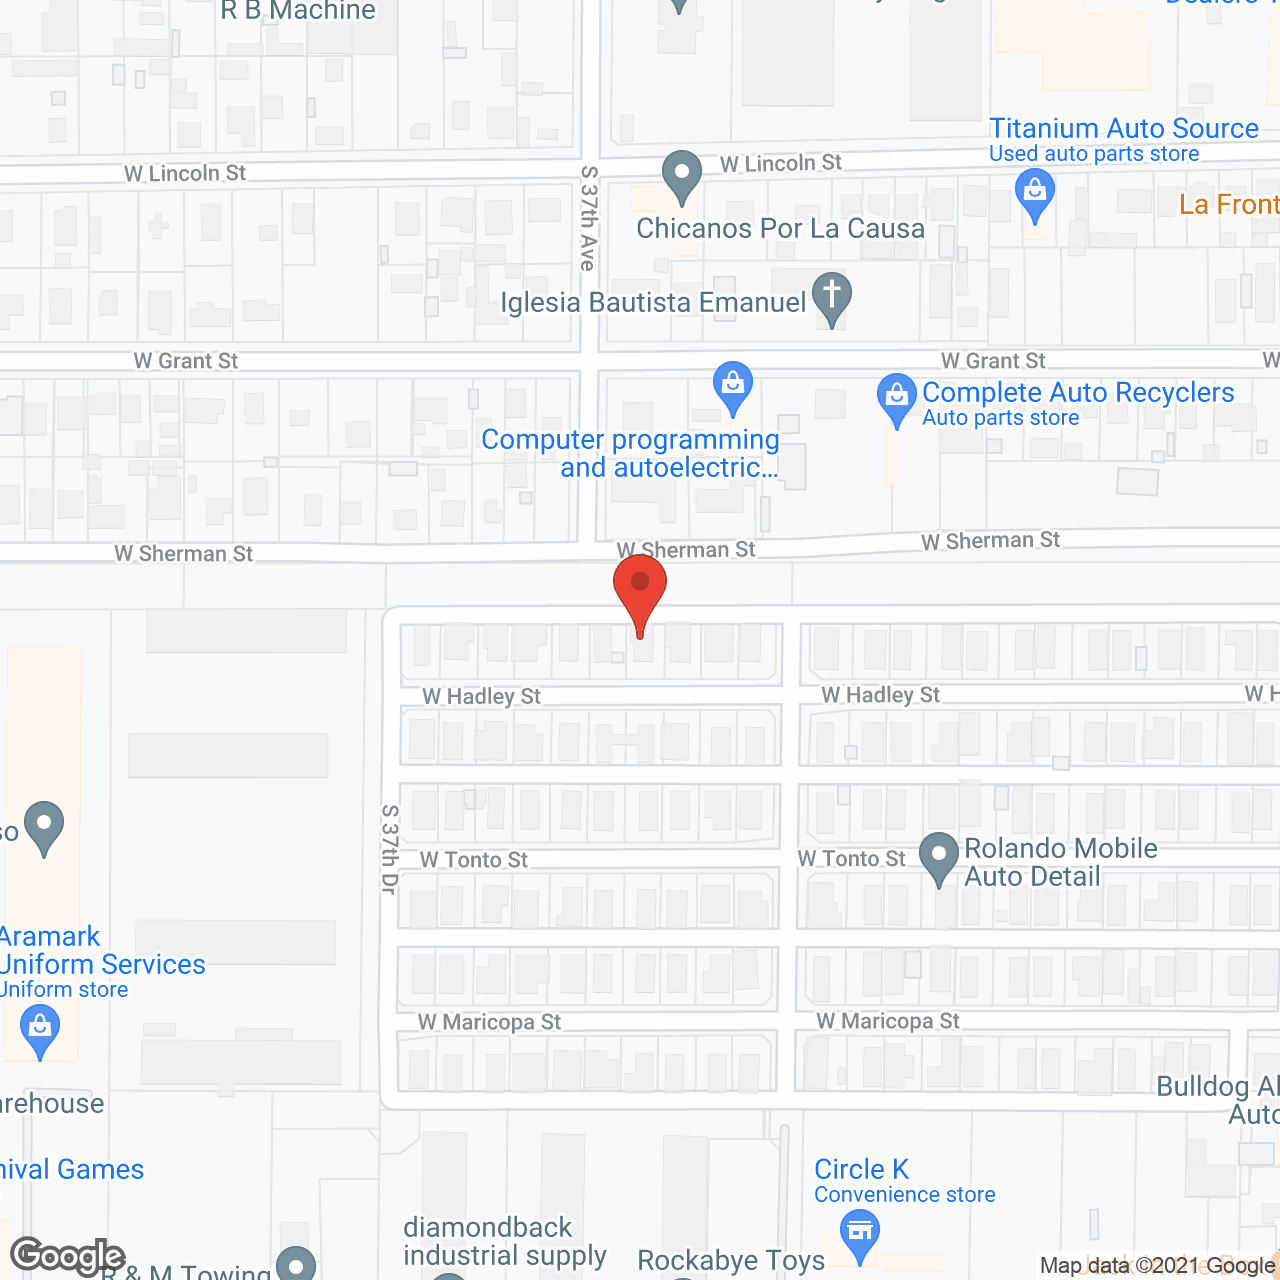 Absolute Assisted Living Adult Care Homes in google map